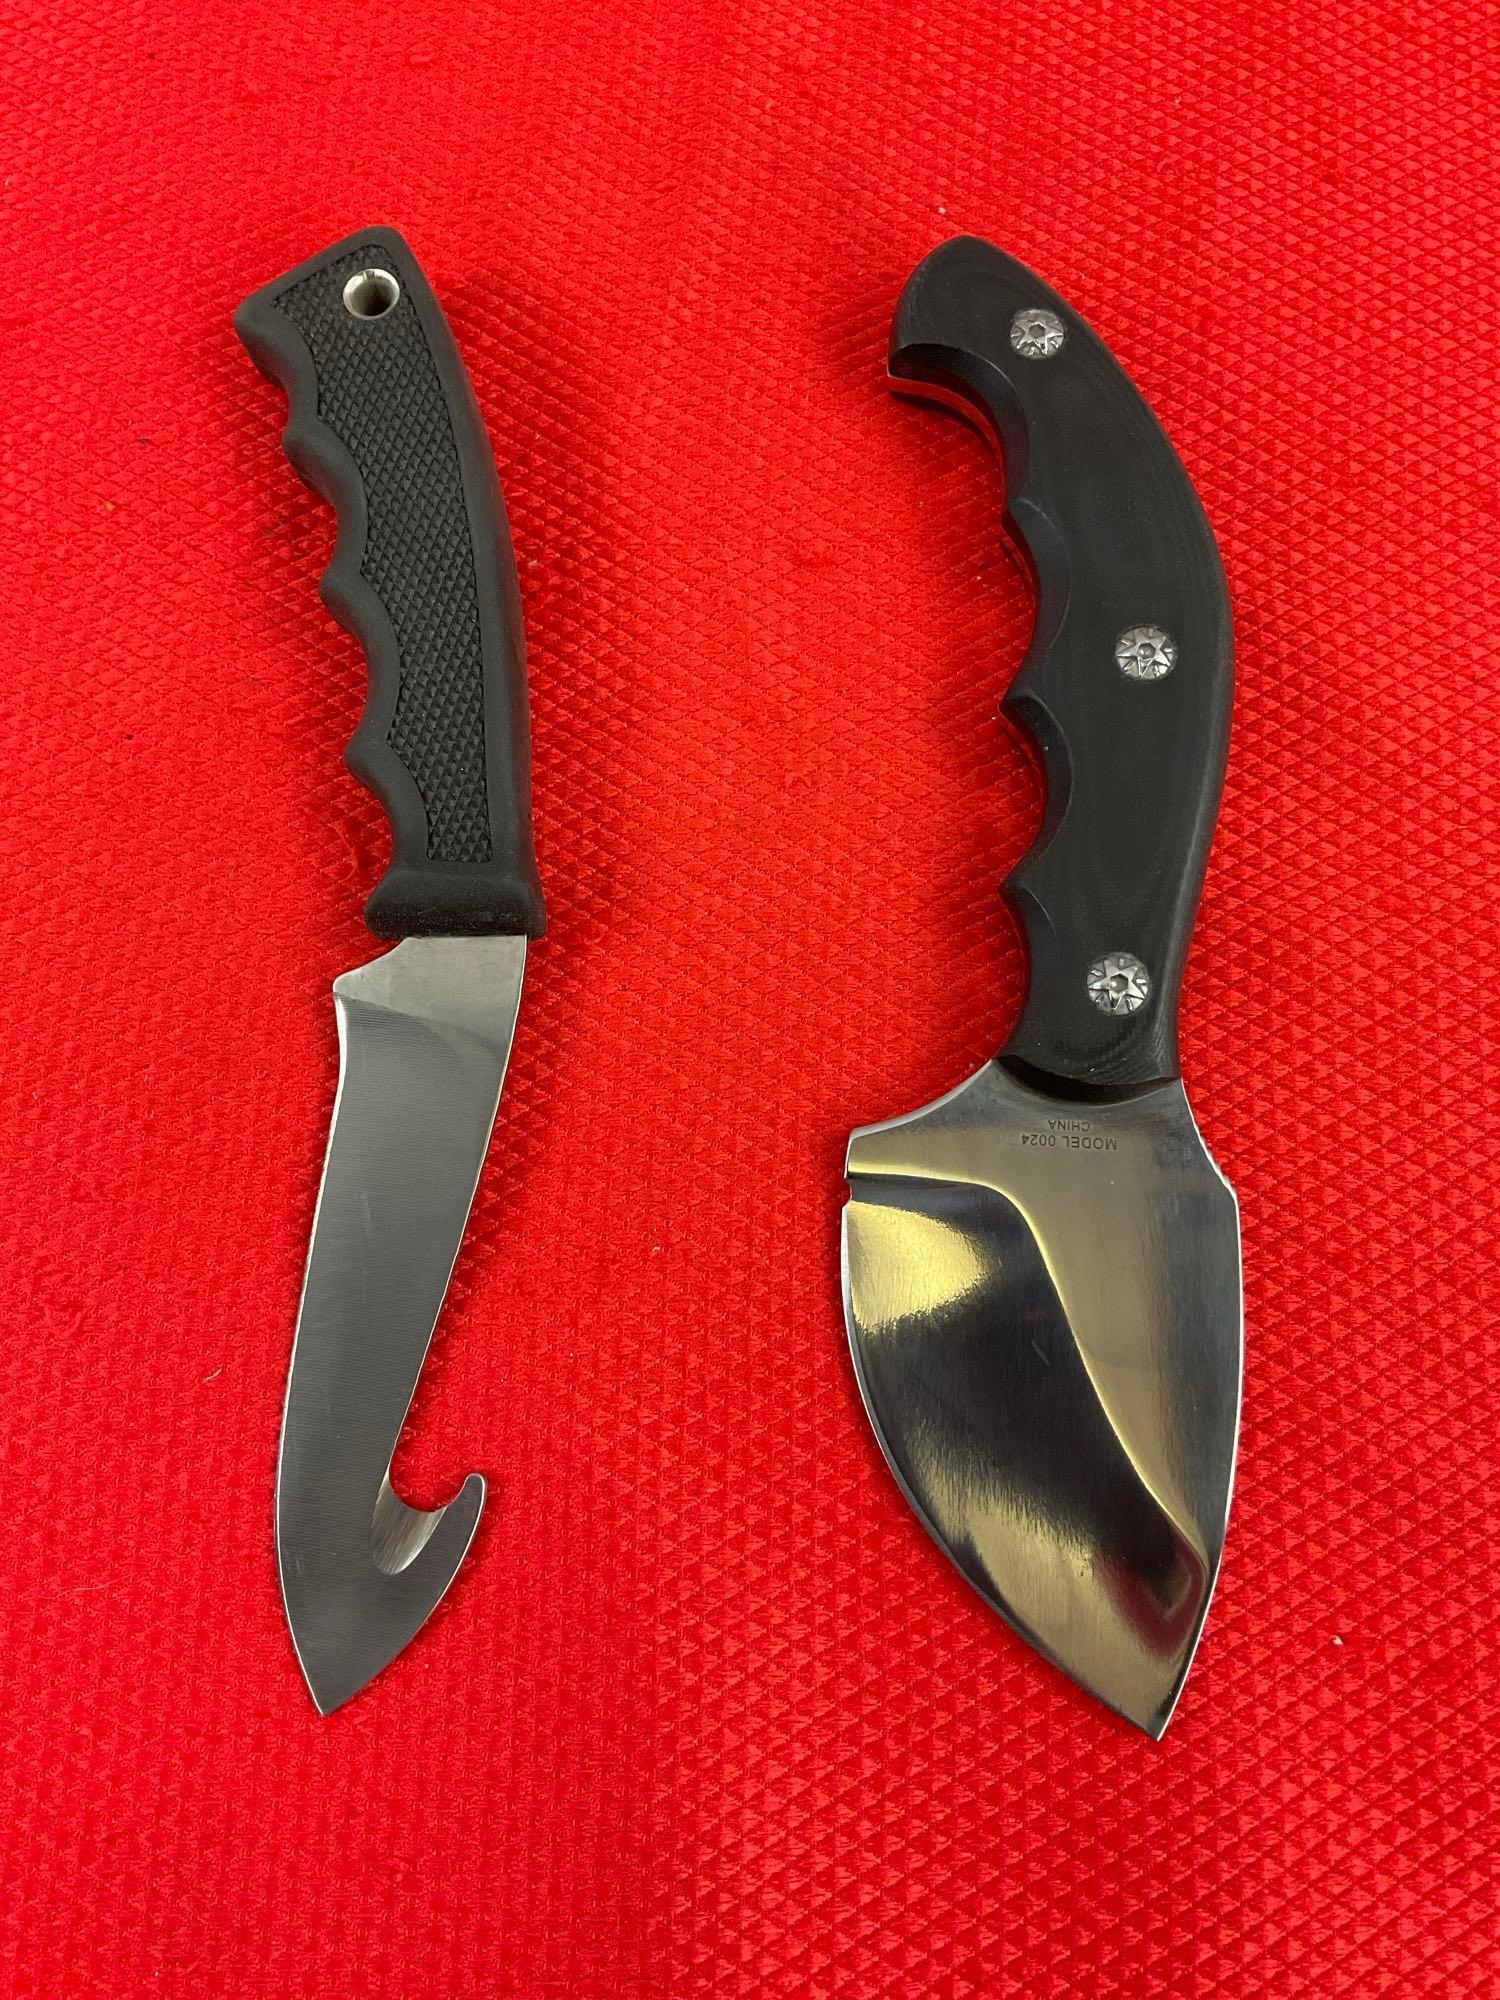 2 pcs Steel Fixed Blade Skinning Knives w/ Sheathes. Camillus Buckmaster & Browning 0024. See pics.